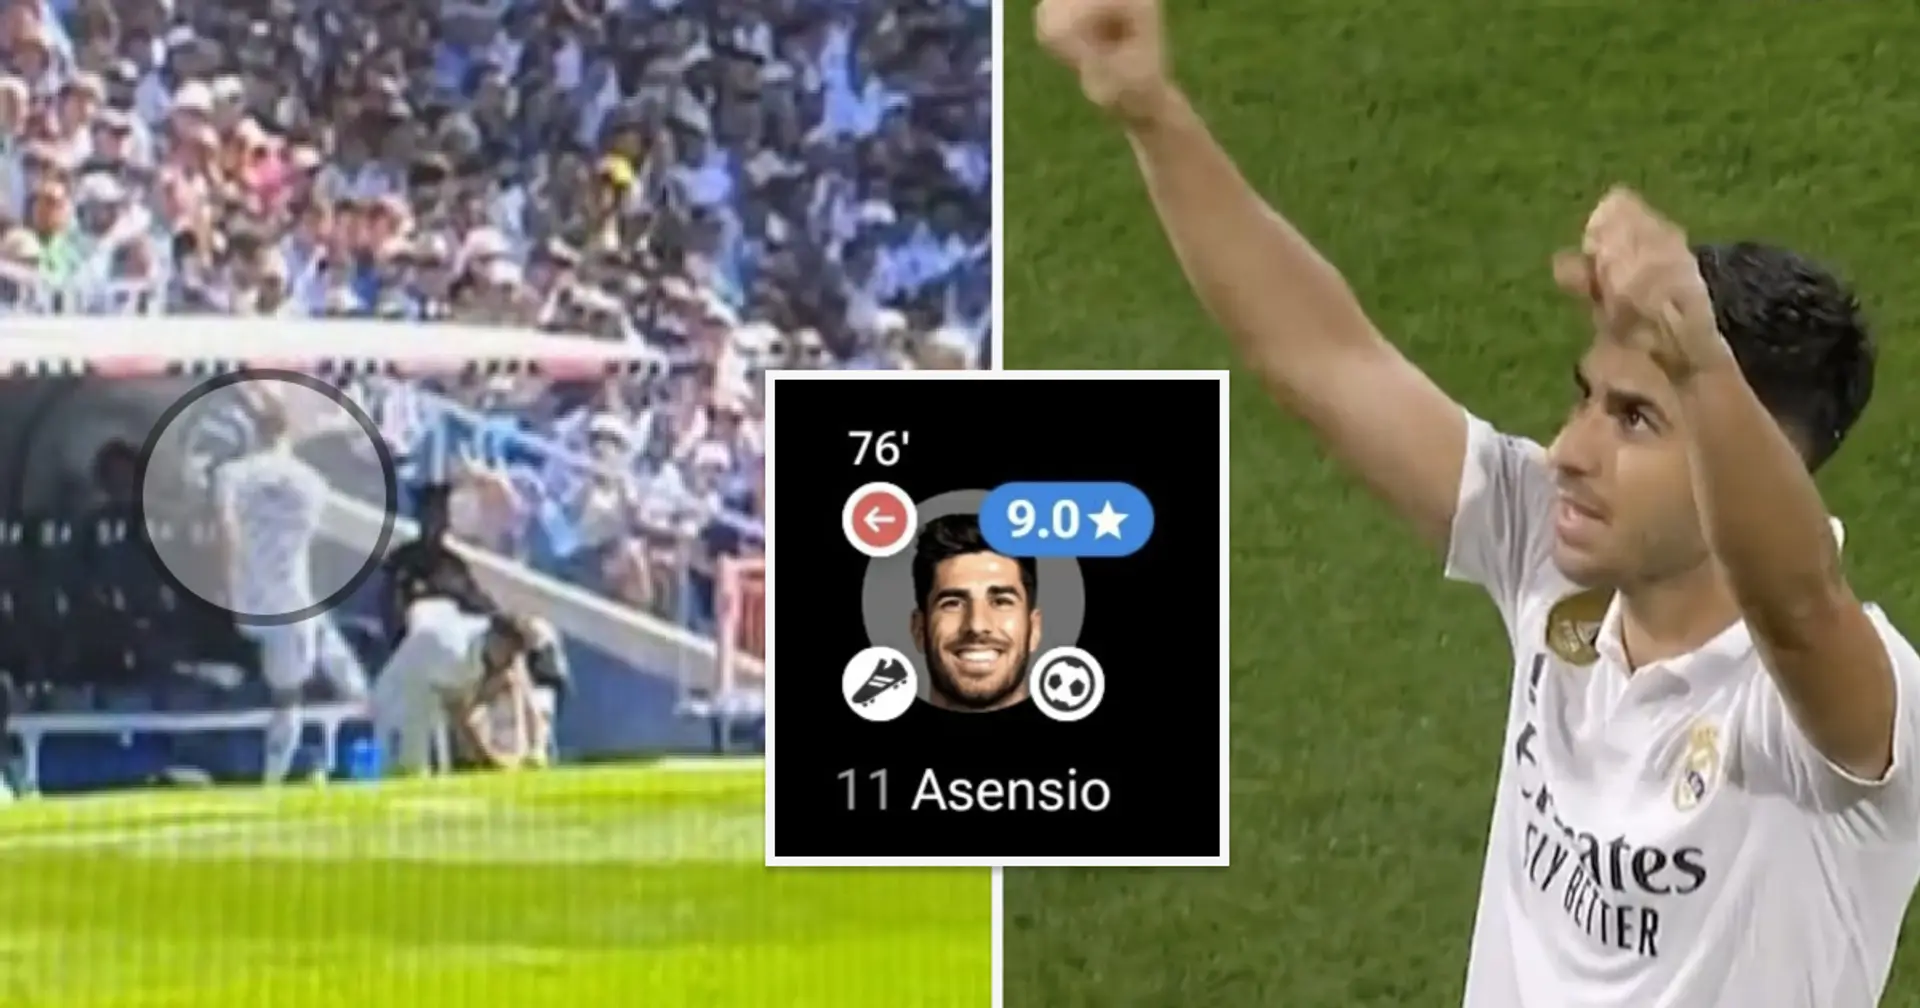 'Hasn't been the same since': Fan points out exact moment when Asensio started balling again